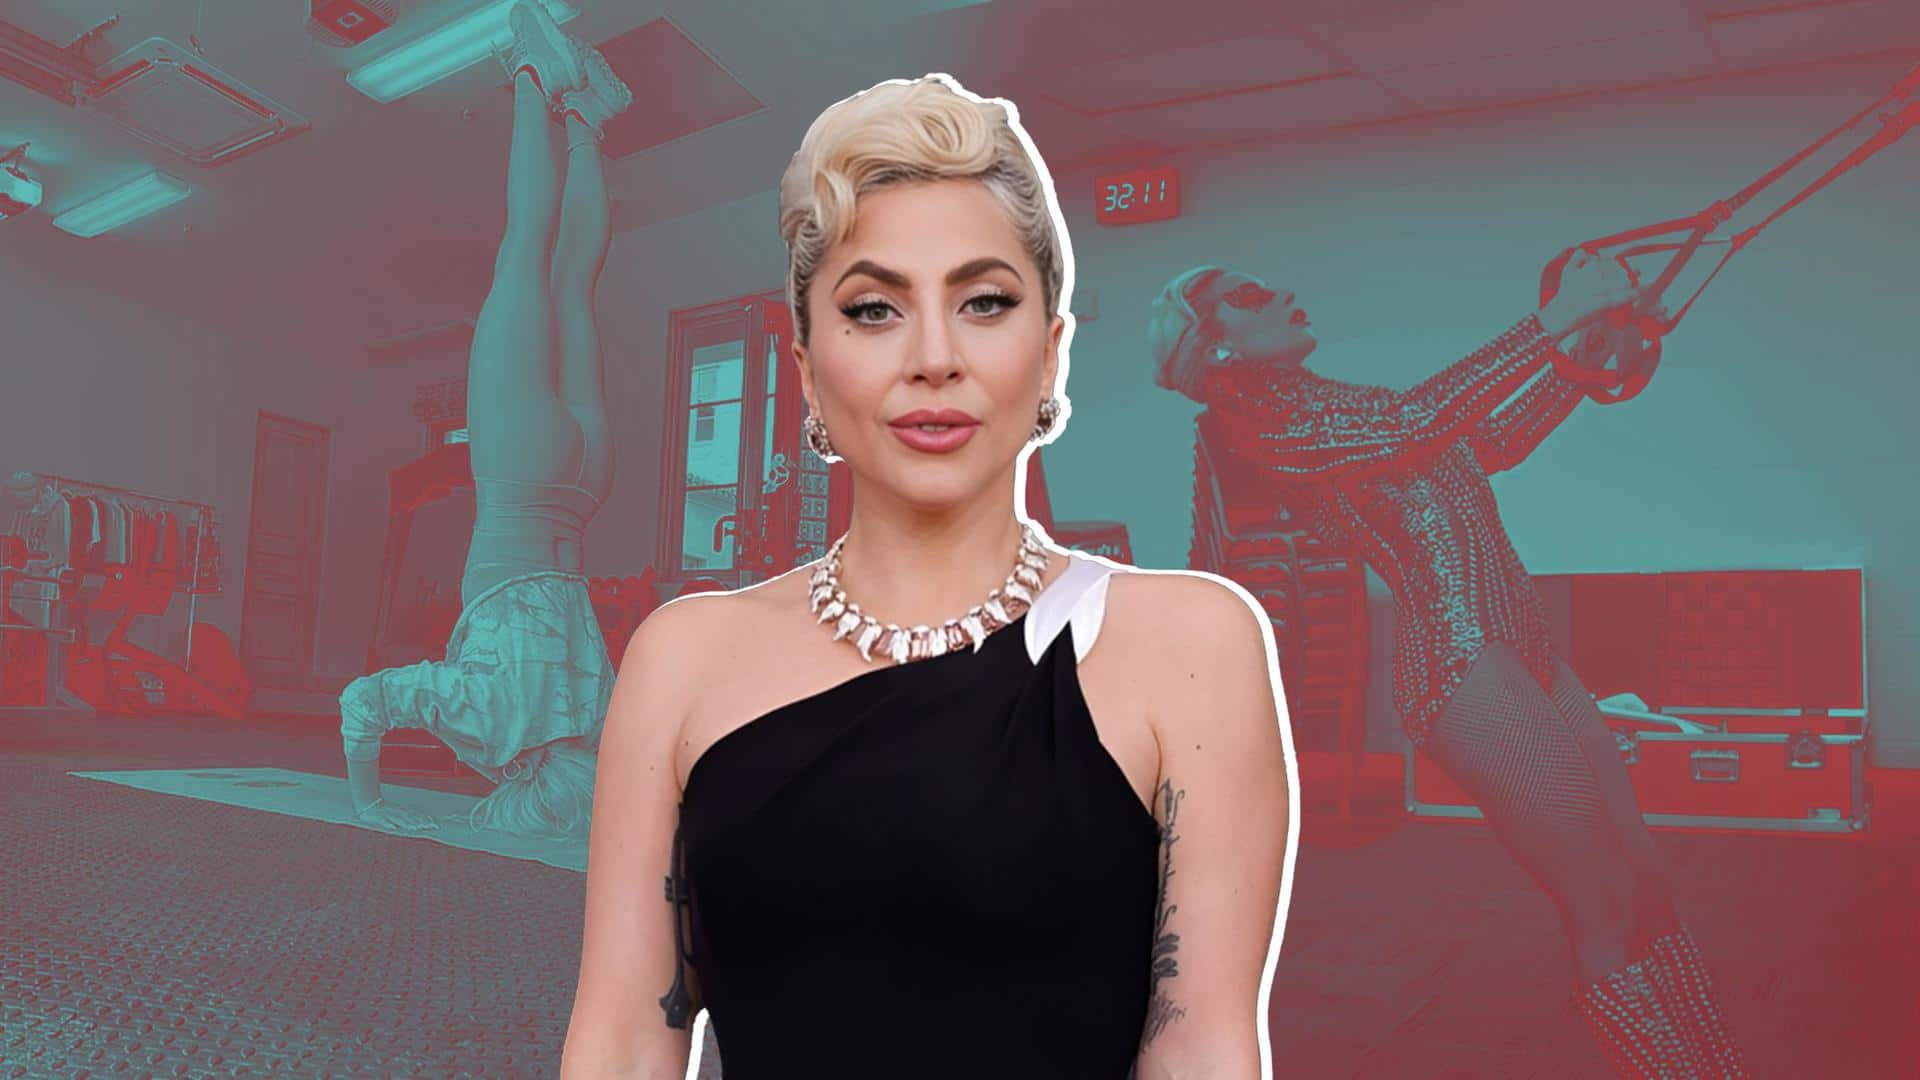 Happy birthday Lady Gaga! Check out her fitness secrets